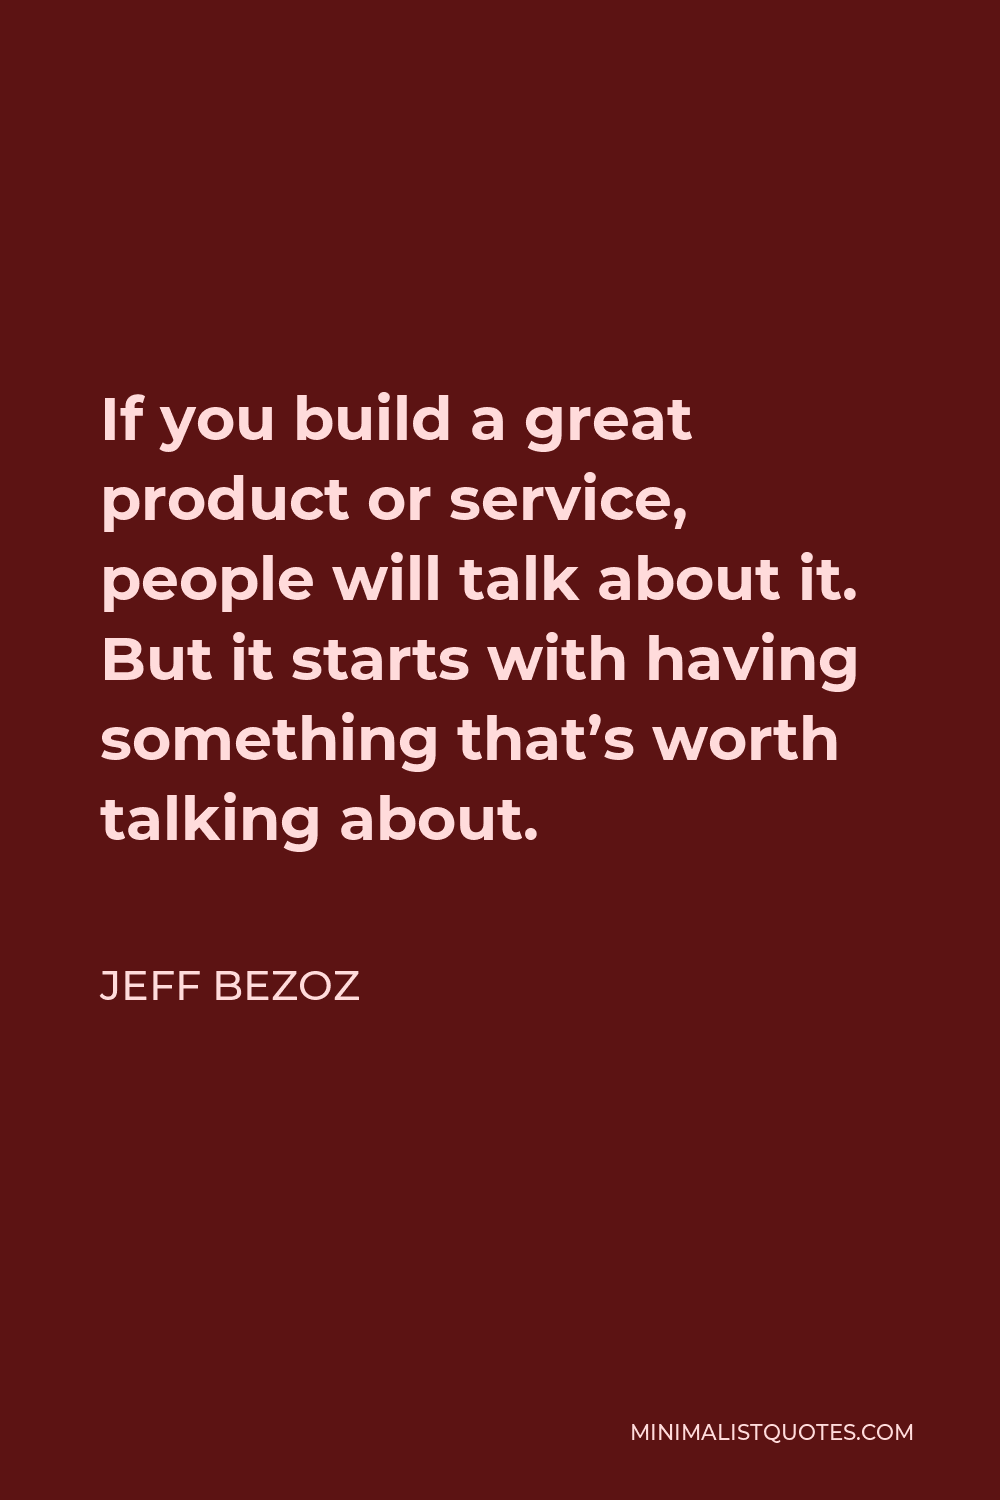 Jeff Bezoz Quote - If you build a great product or service, people will talk about it. But it starts with having something that’s worth talking about.